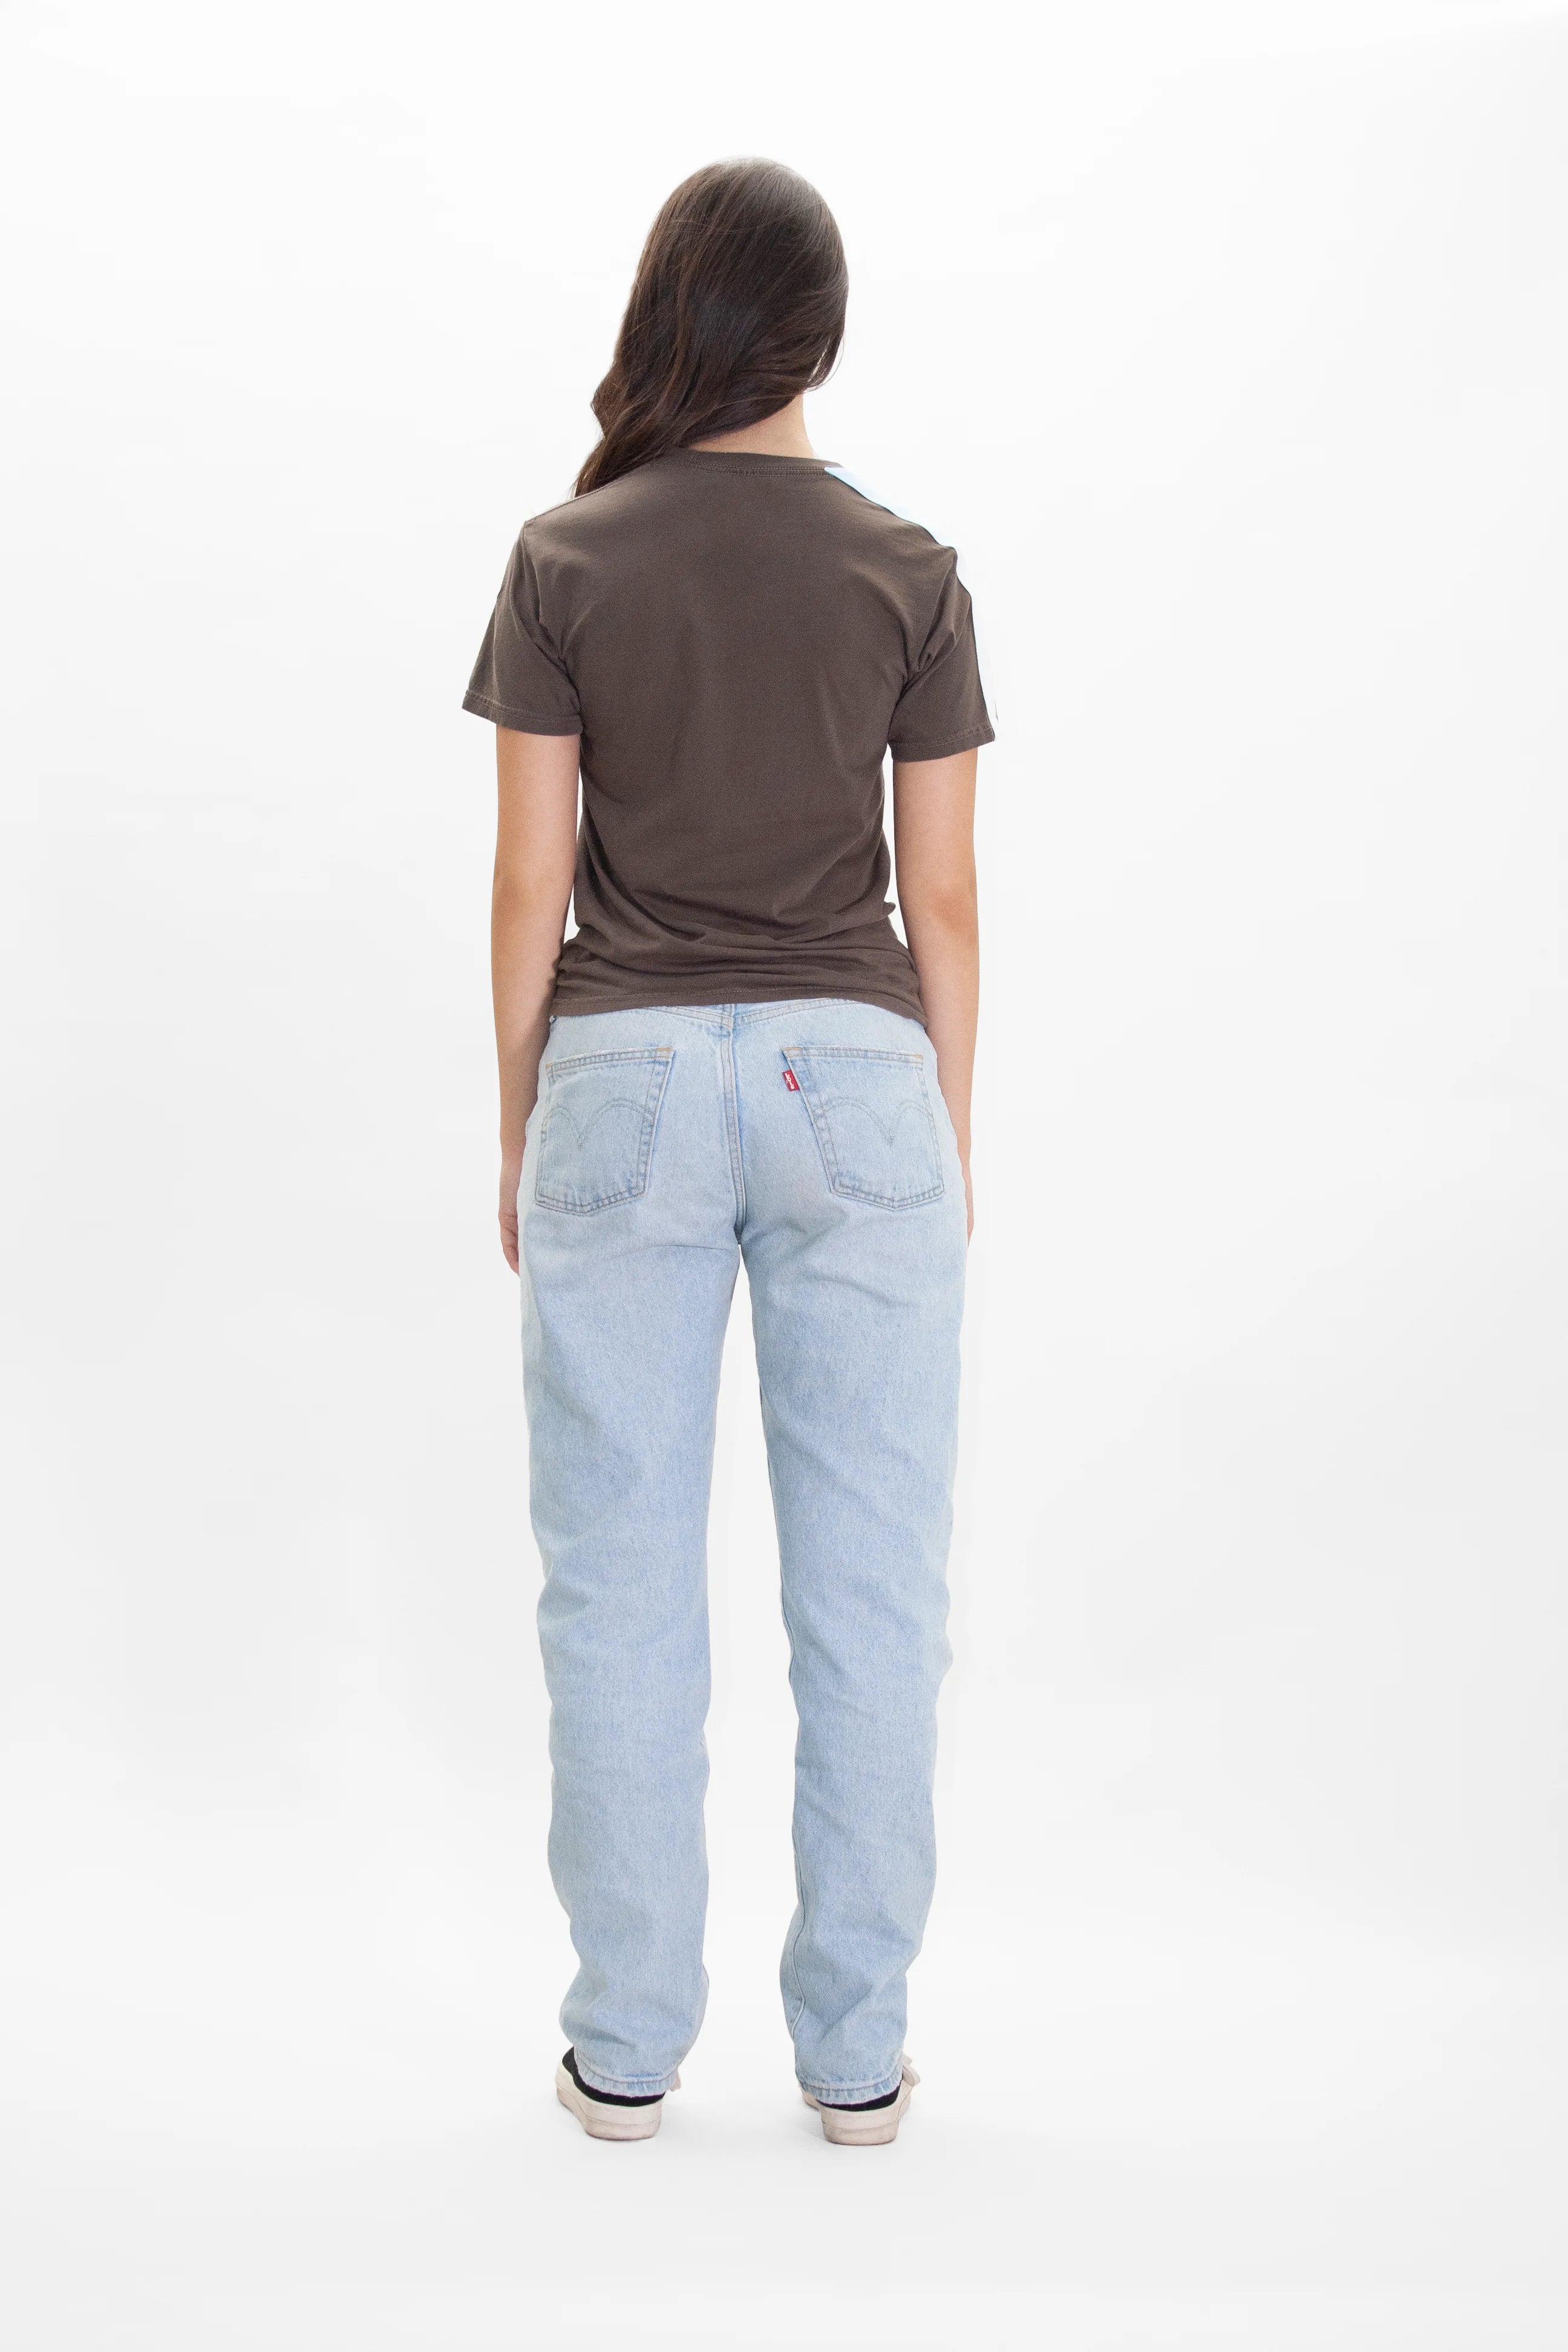 The back view of a woman wearing GFLApparel's MERKABA TEE IN EARTH jeans.